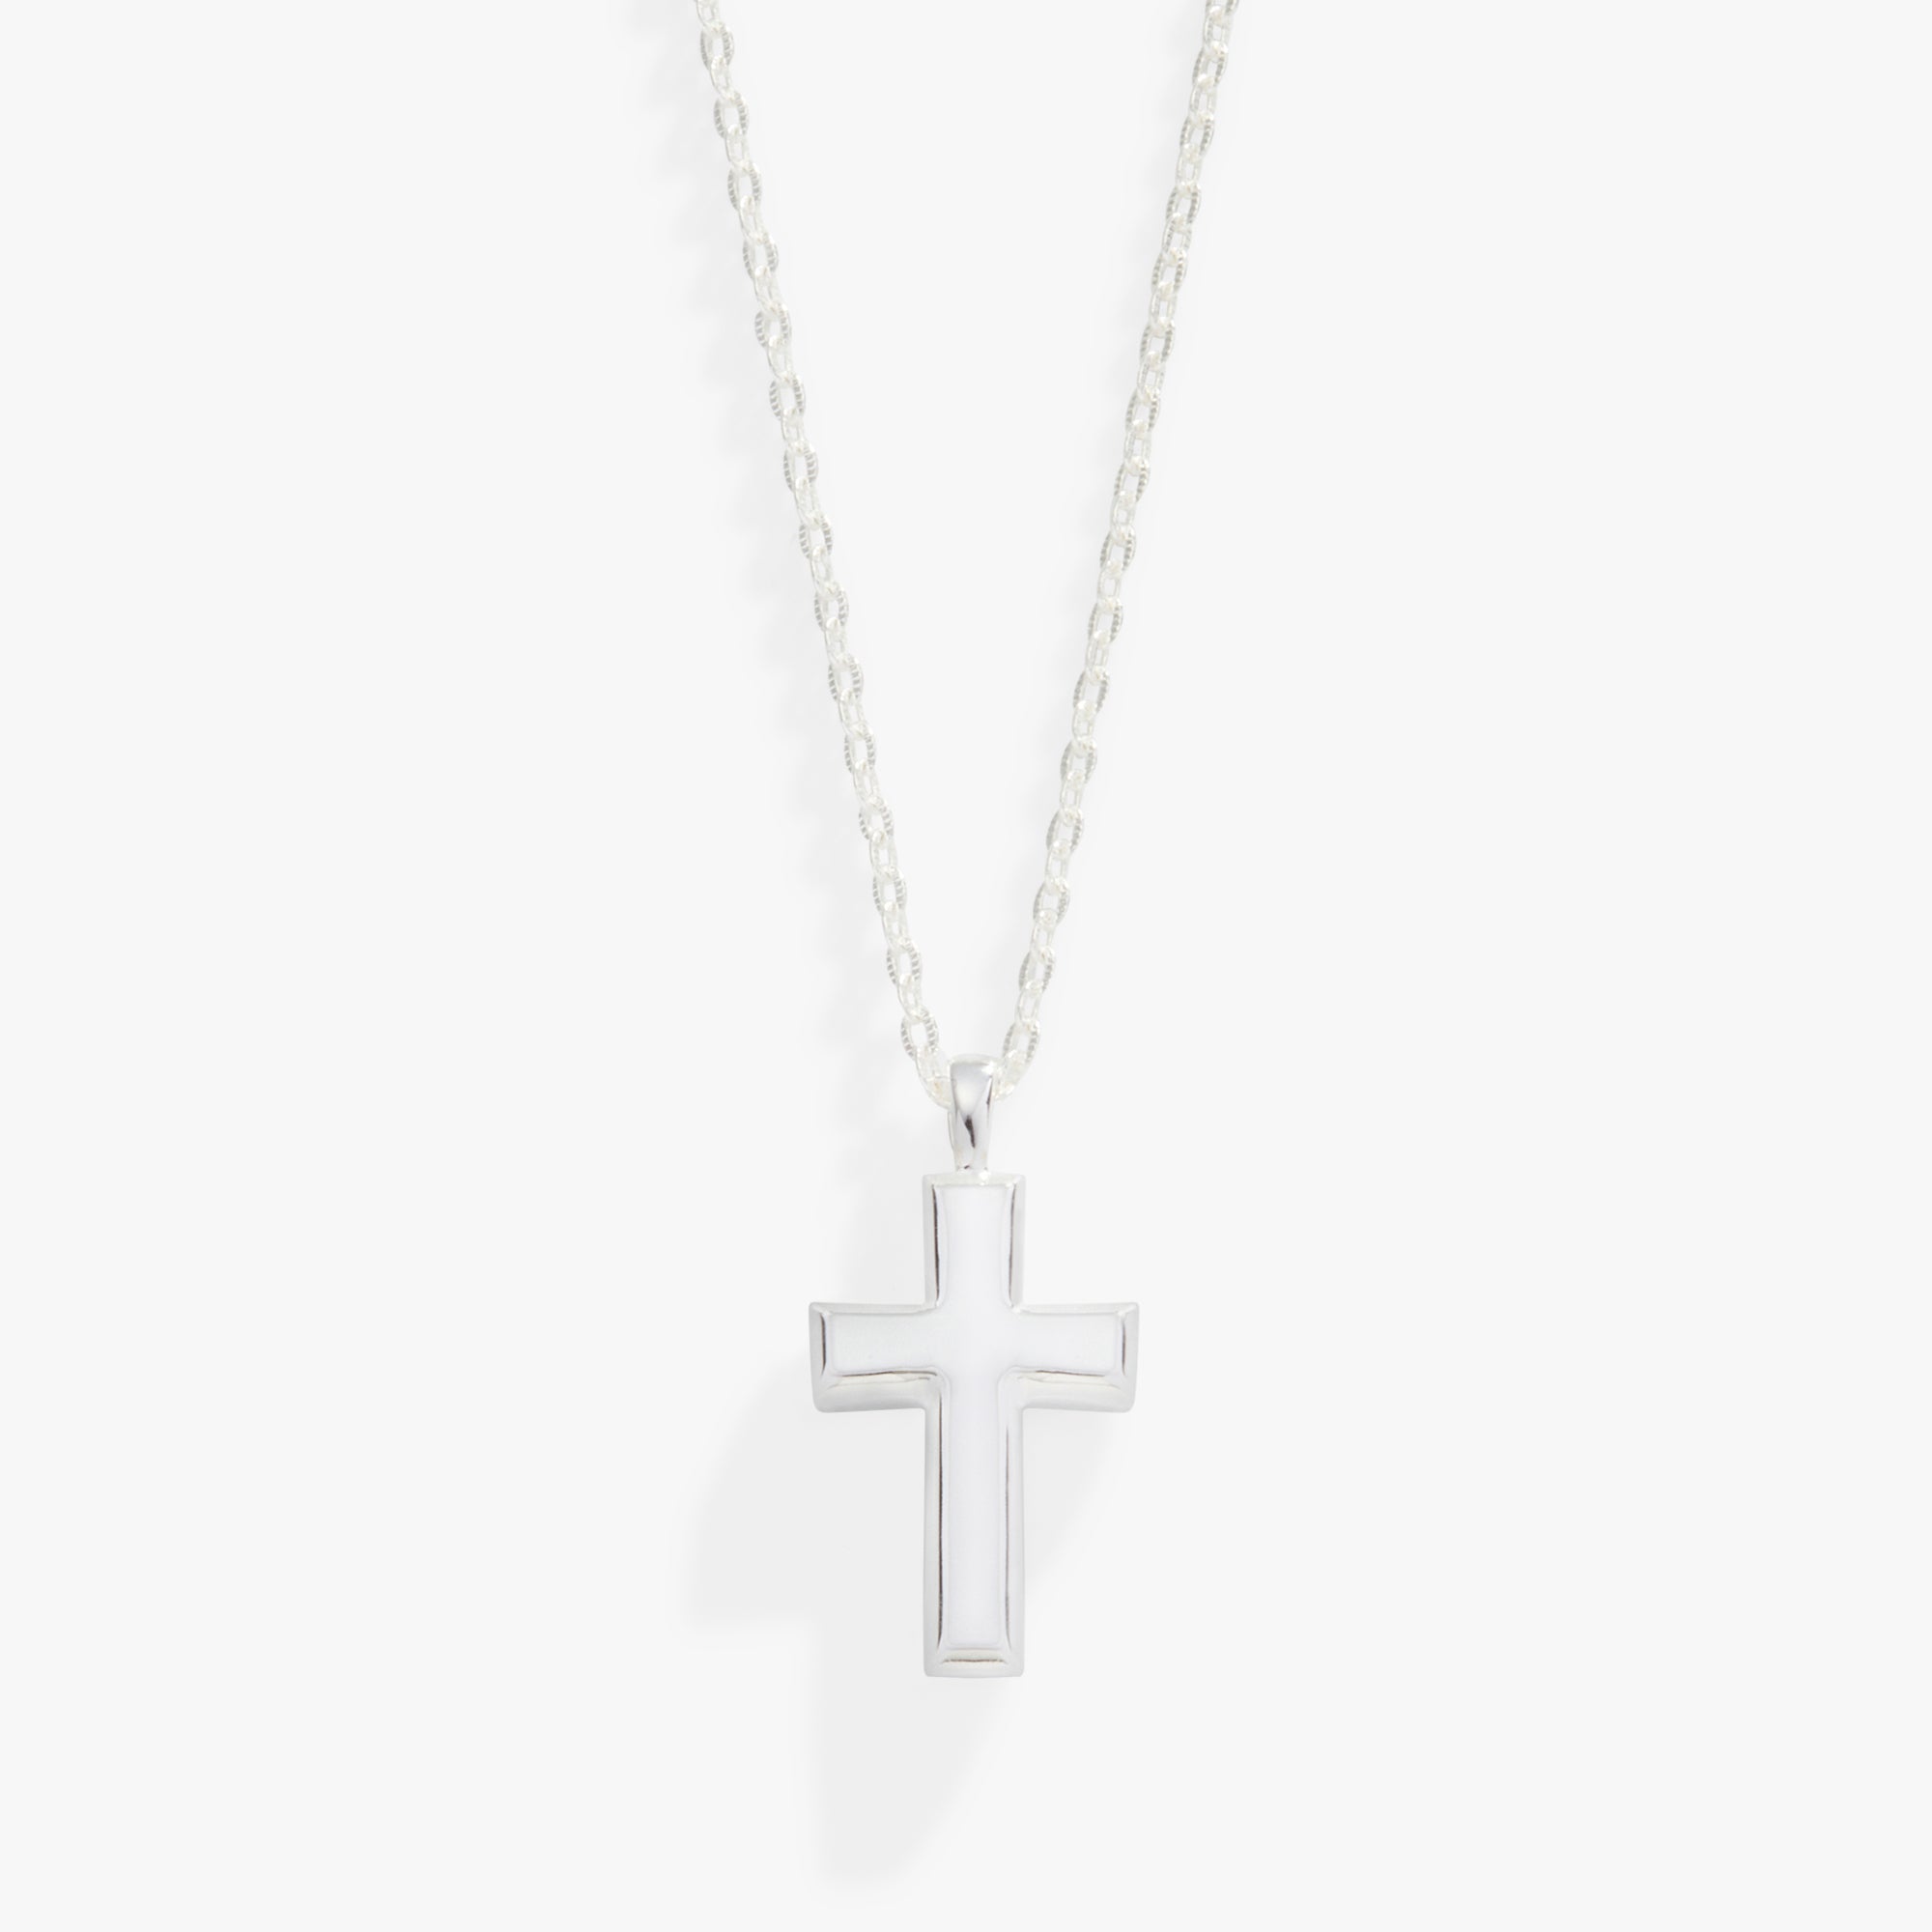 Sunday Soul Gold Tone Chain Necklace with Gold Tone Cross and Semi-Pre